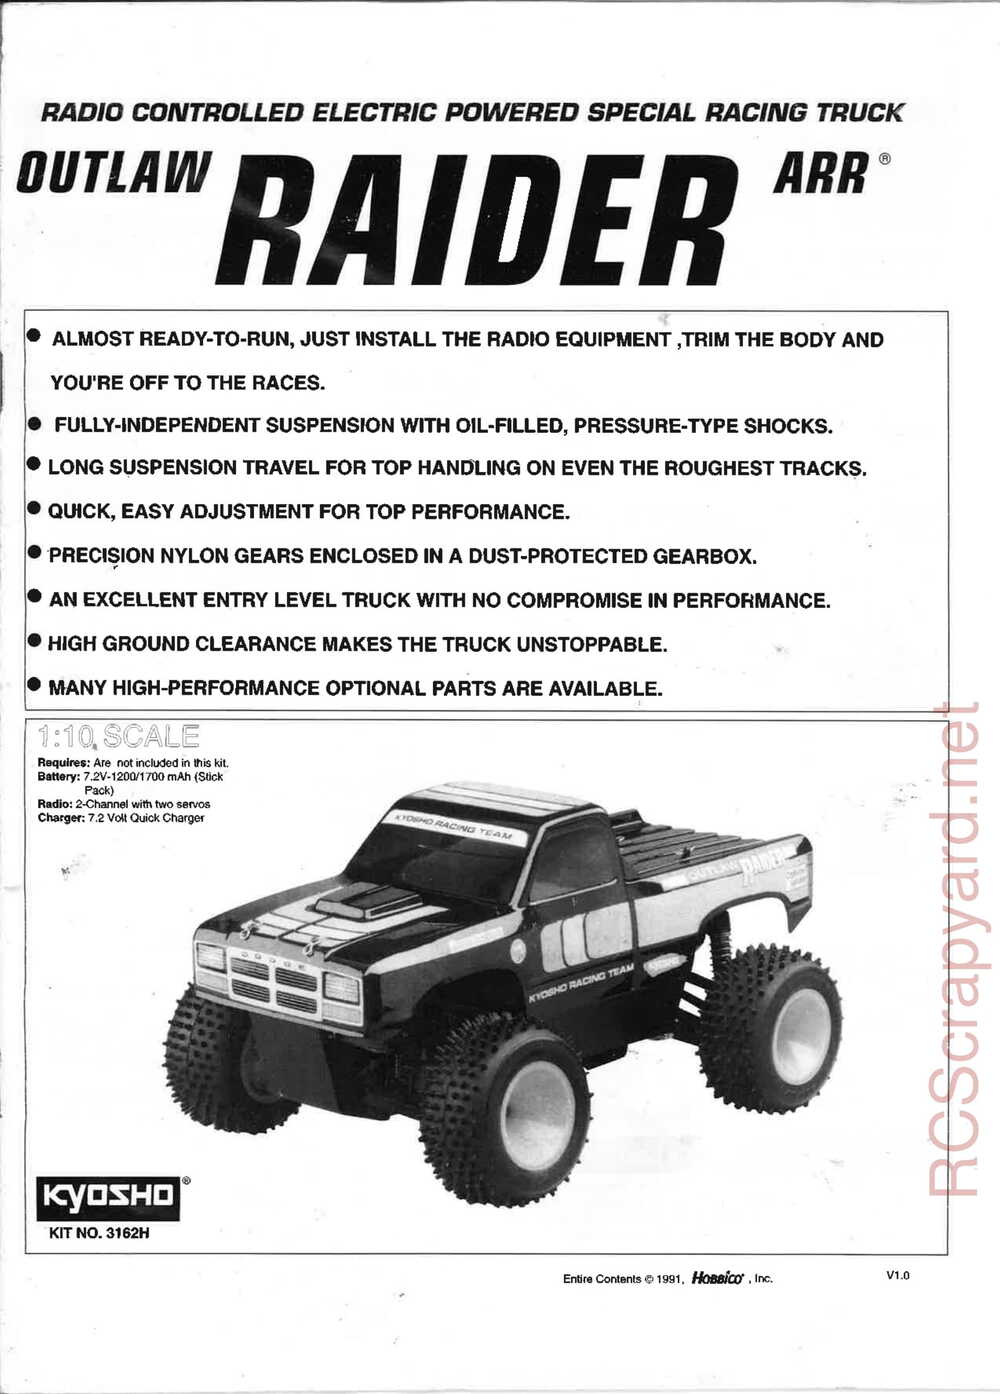 Kyosho - 3162H - Outlaw-Raider ARR - Manual - Page 01